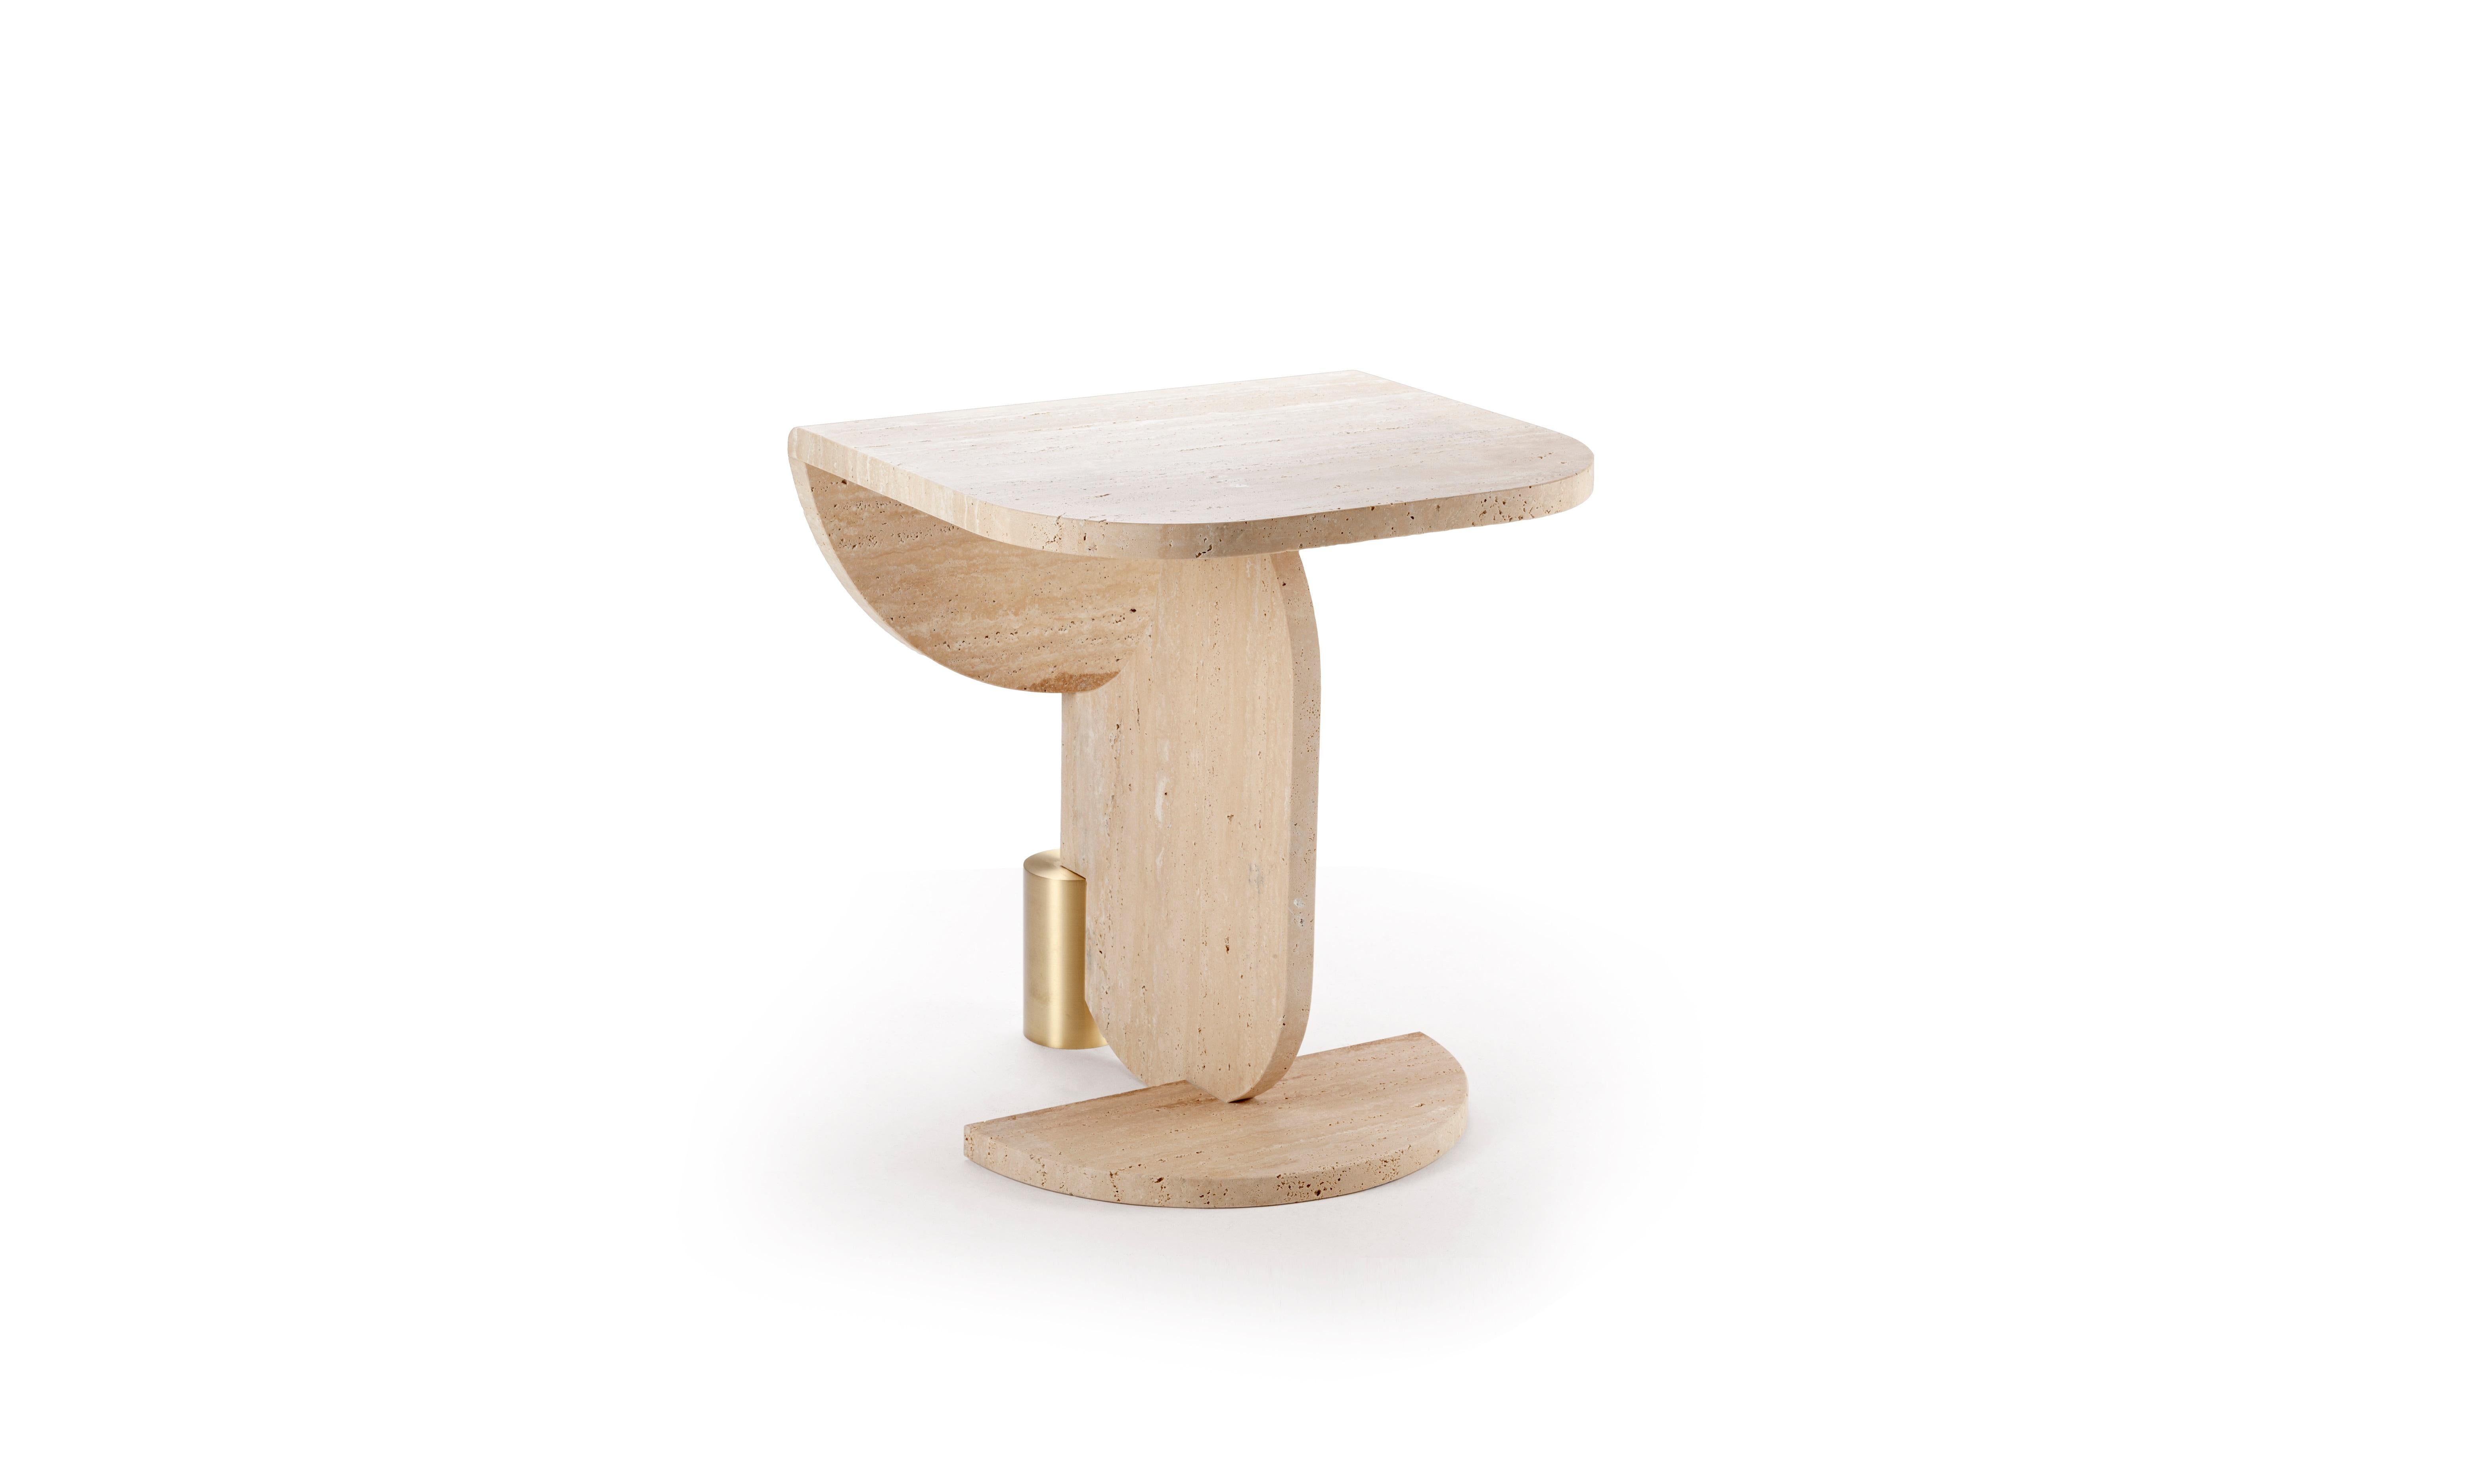 Playing games side table by Dooq.
Dimensions: D 52 x W 60 x H 61 cm. 
Materials: Travertine marble, brass.

The essential shapes of these tables play between them in an alluring game of proportion and color which results in the creation of a